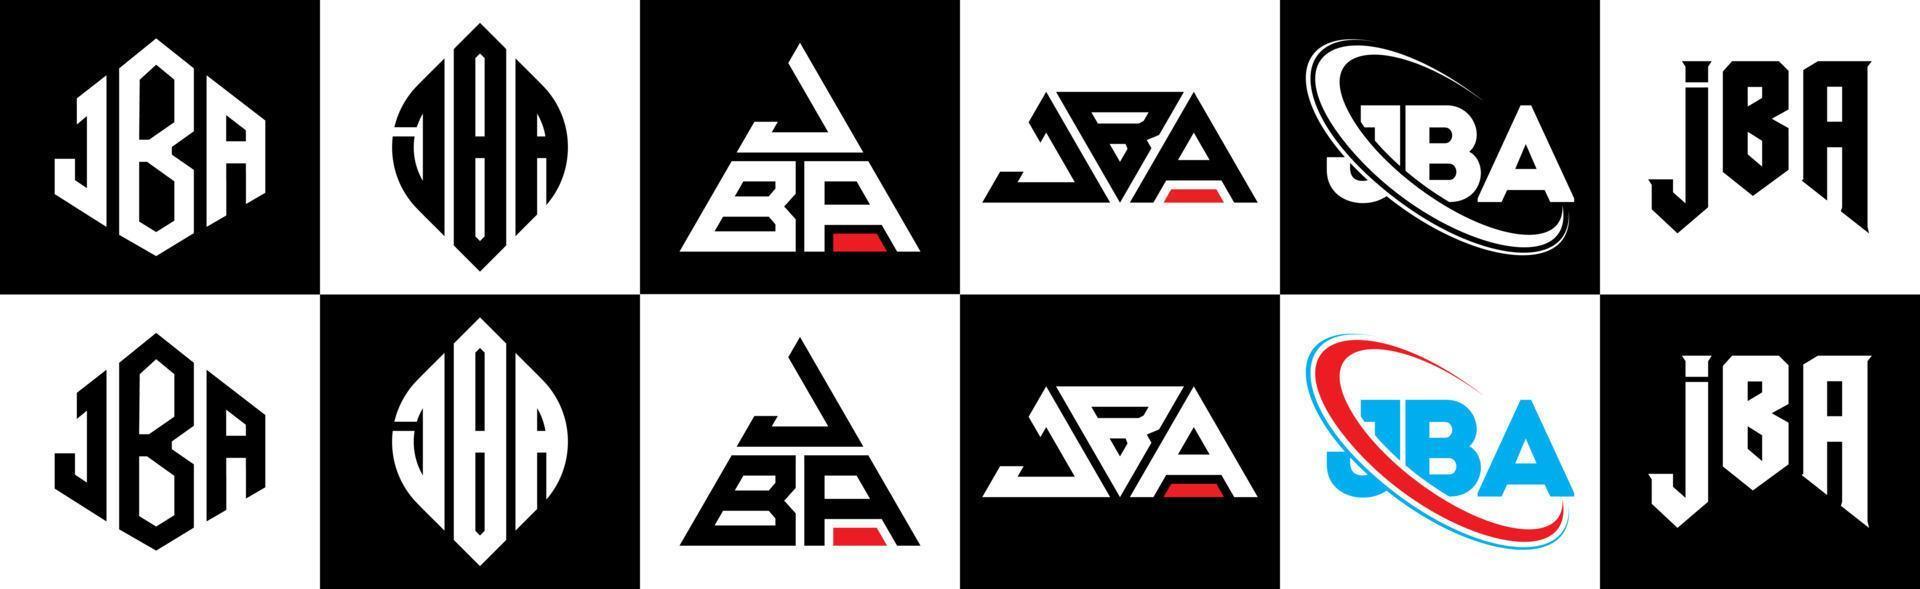 JBA letter logo design in six style. JBA polygon, circle, triangle, hexagon, flat and simple style with black and white color variation letter logo set in one artboard. JBA minimalist and classic logo vector